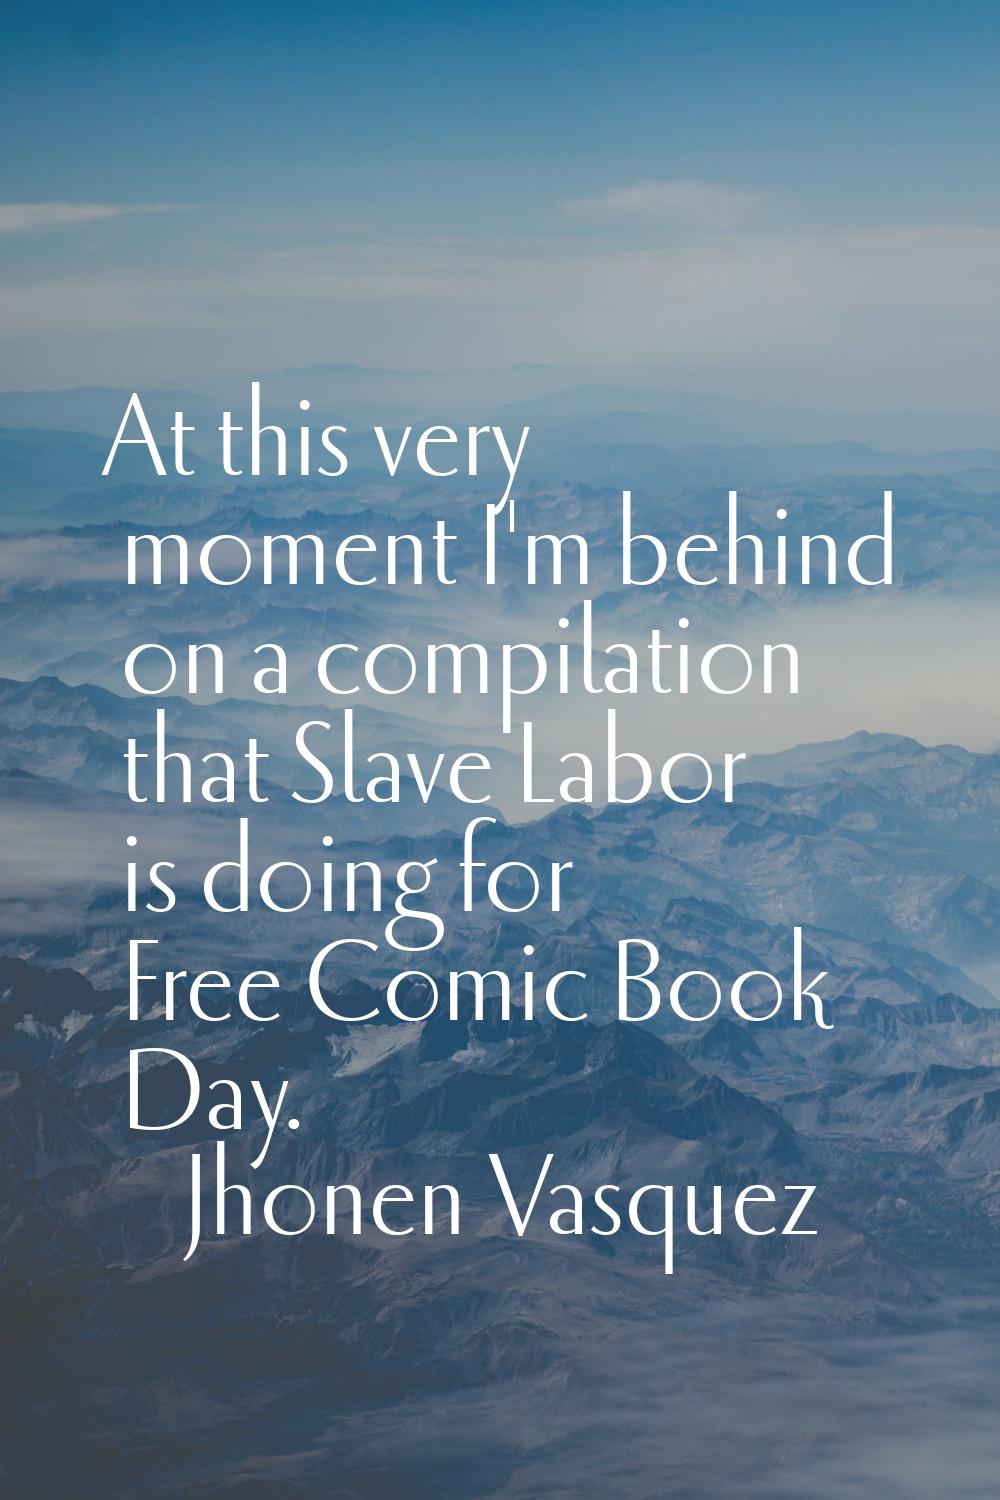 At this very moment I'm behind on a compilation that Slave Labor is doing for Free Comic Book Day.